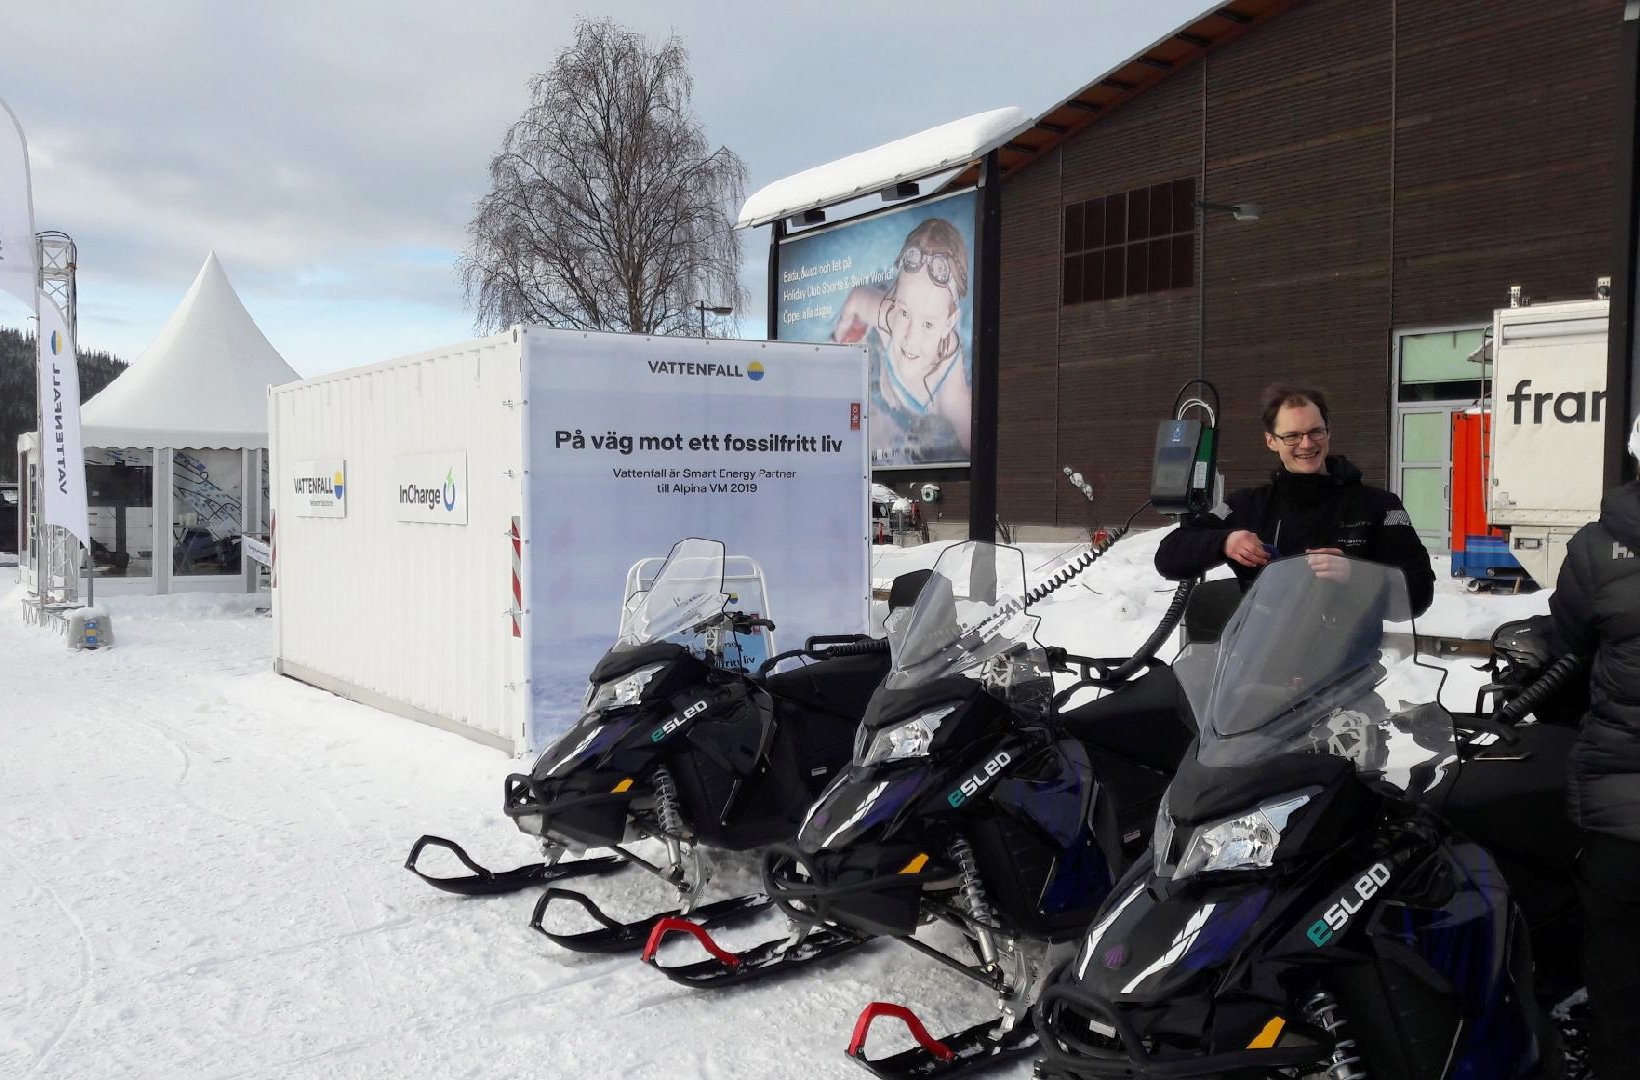 During the FIS Alpine World Ski Championships in Åre, Sweden, the mega battery will charge vehicles and electrical snowmobiles.